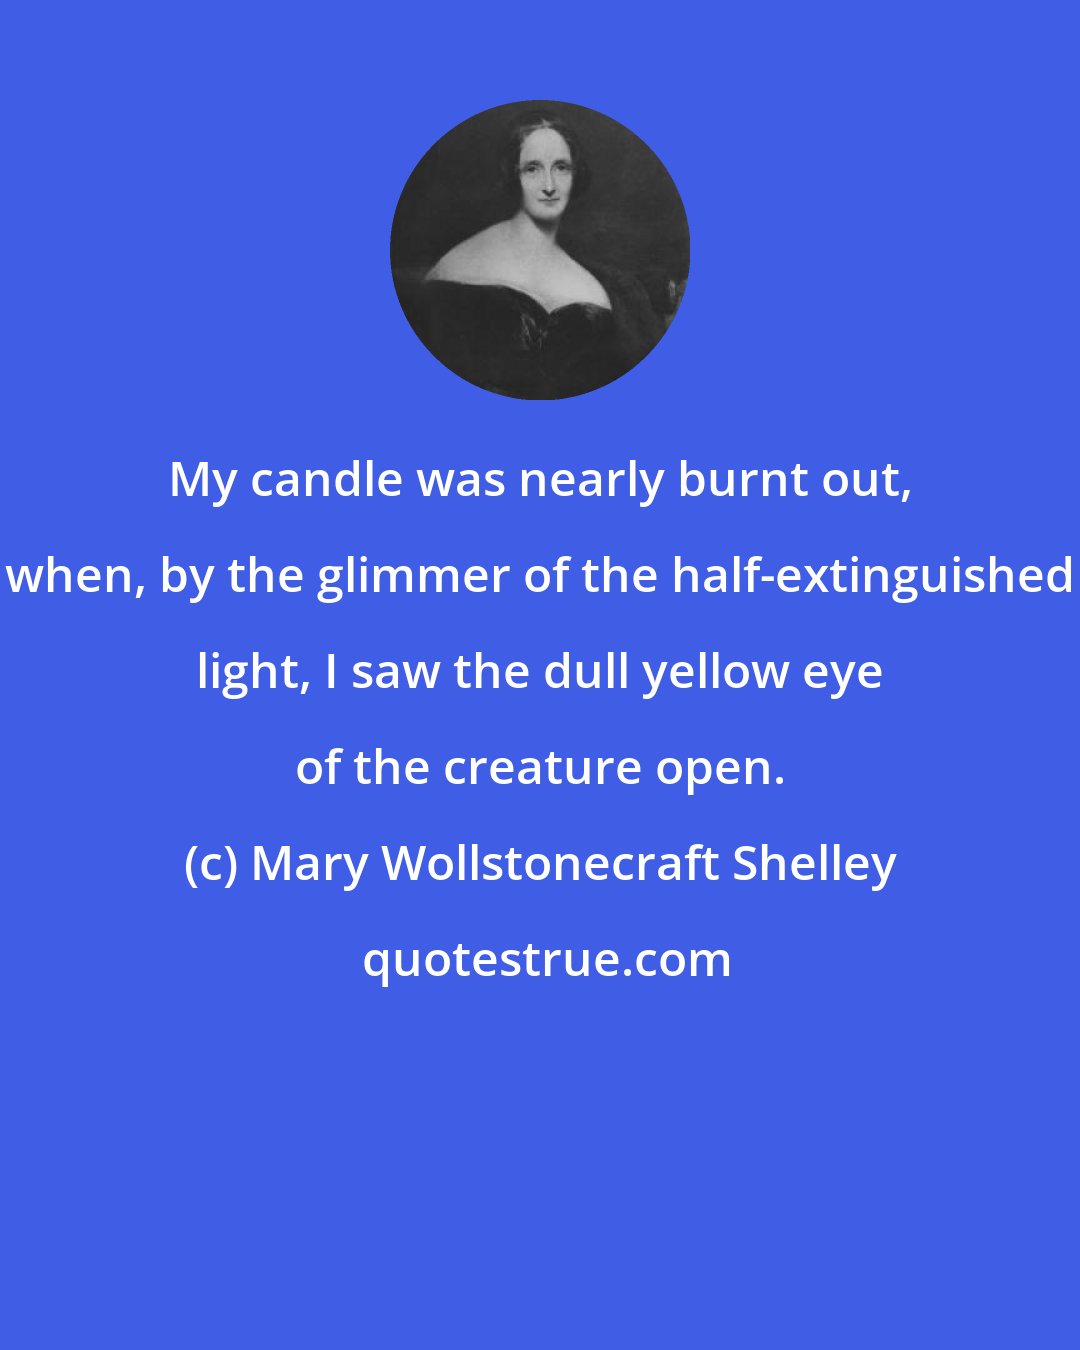 Mary Wollstonecraft Shelley: My candle was nearly burnt out, when, by the glimmer of the half-extinguished light, I saw the dull yellow eye of the creature open.